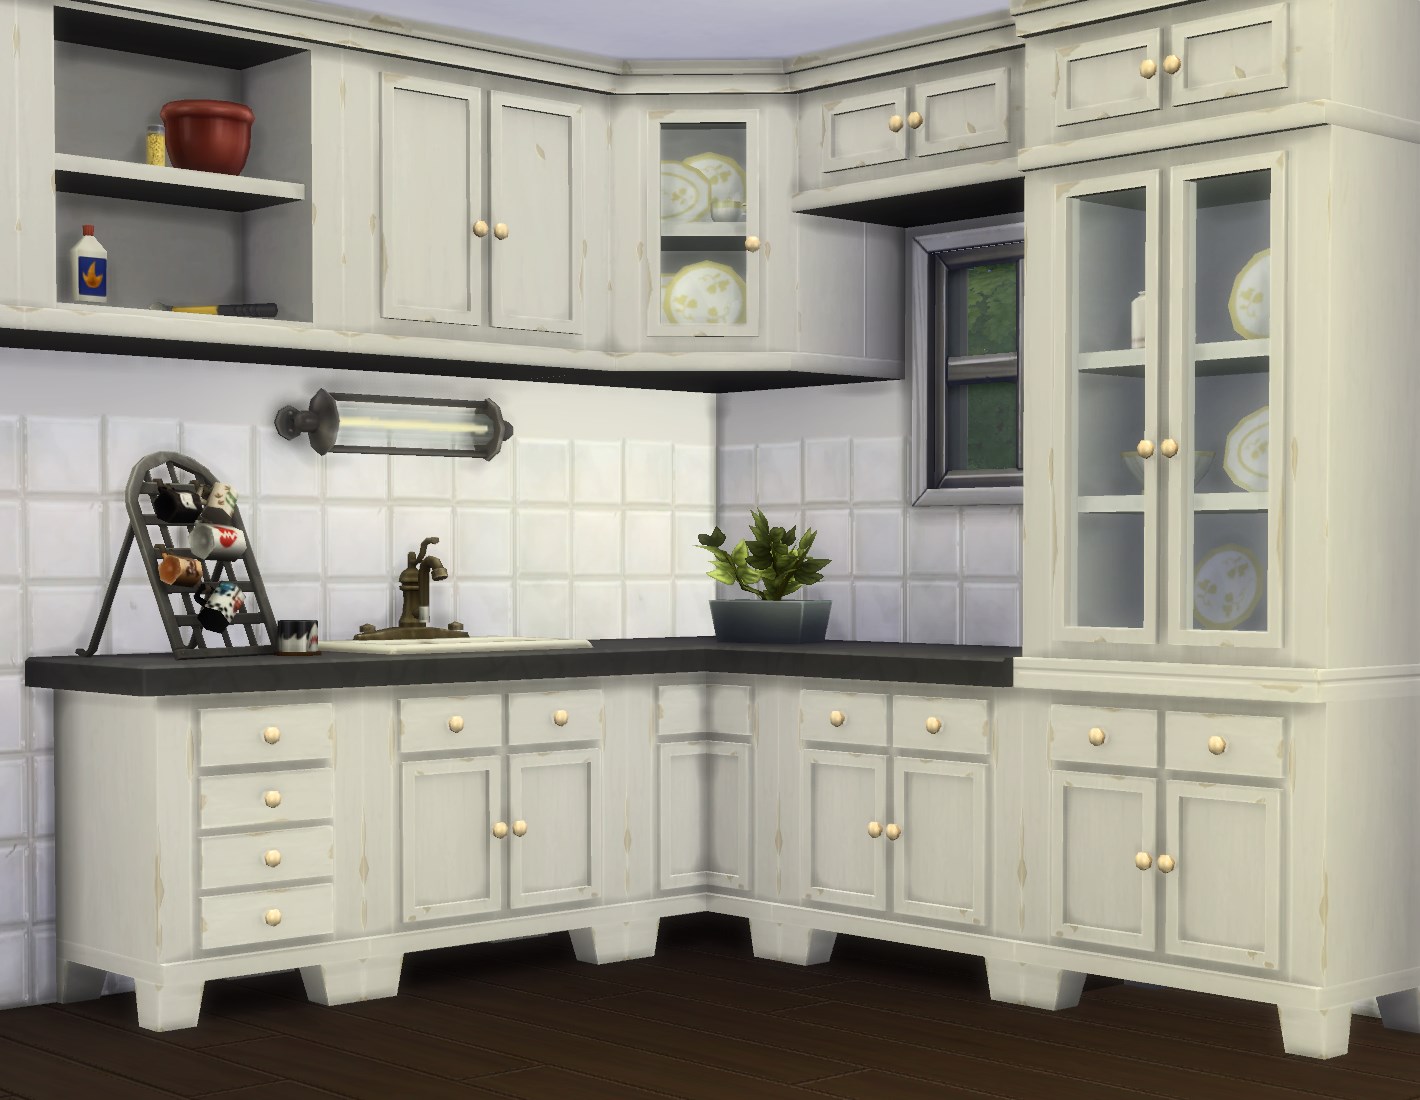 The Sims 4: Everything In The Country Kitchen Kit